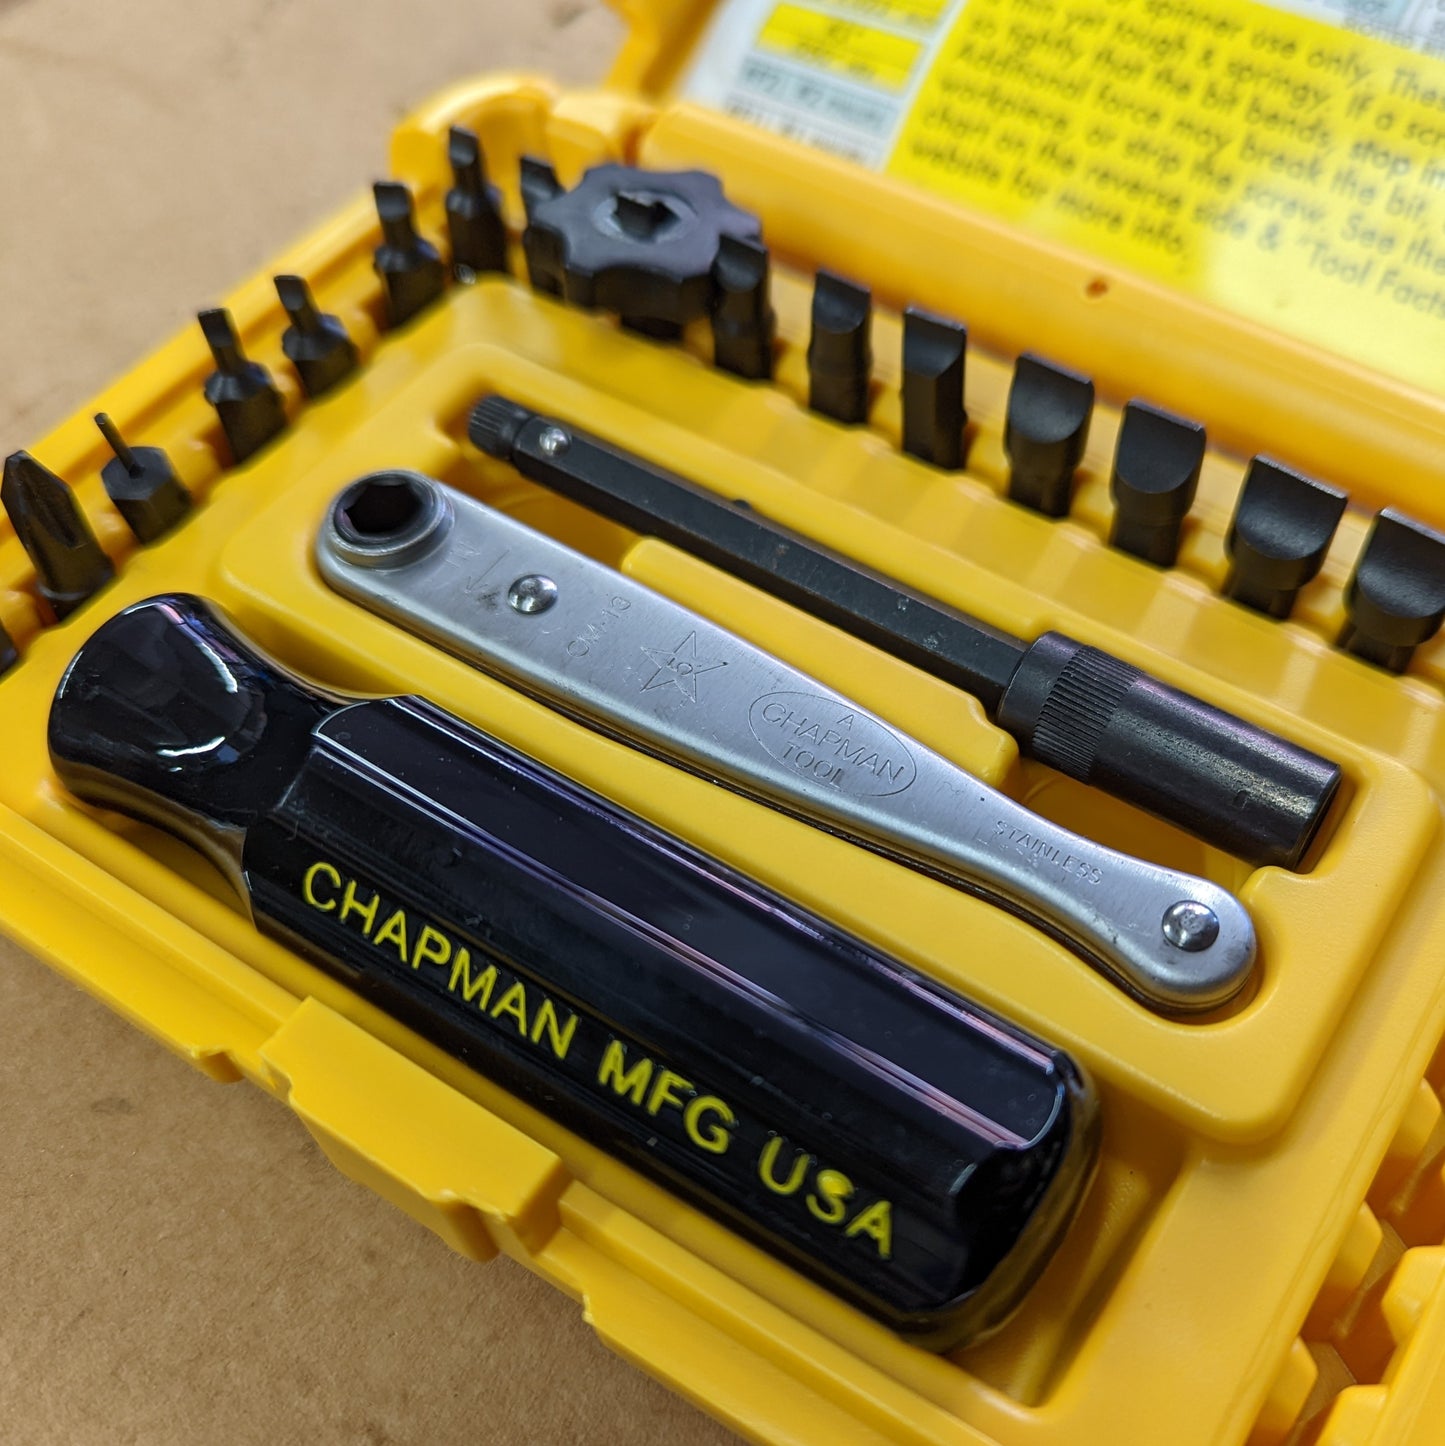 Chapman Starter Slotted Screwdriver Set for Small Machines (9600)